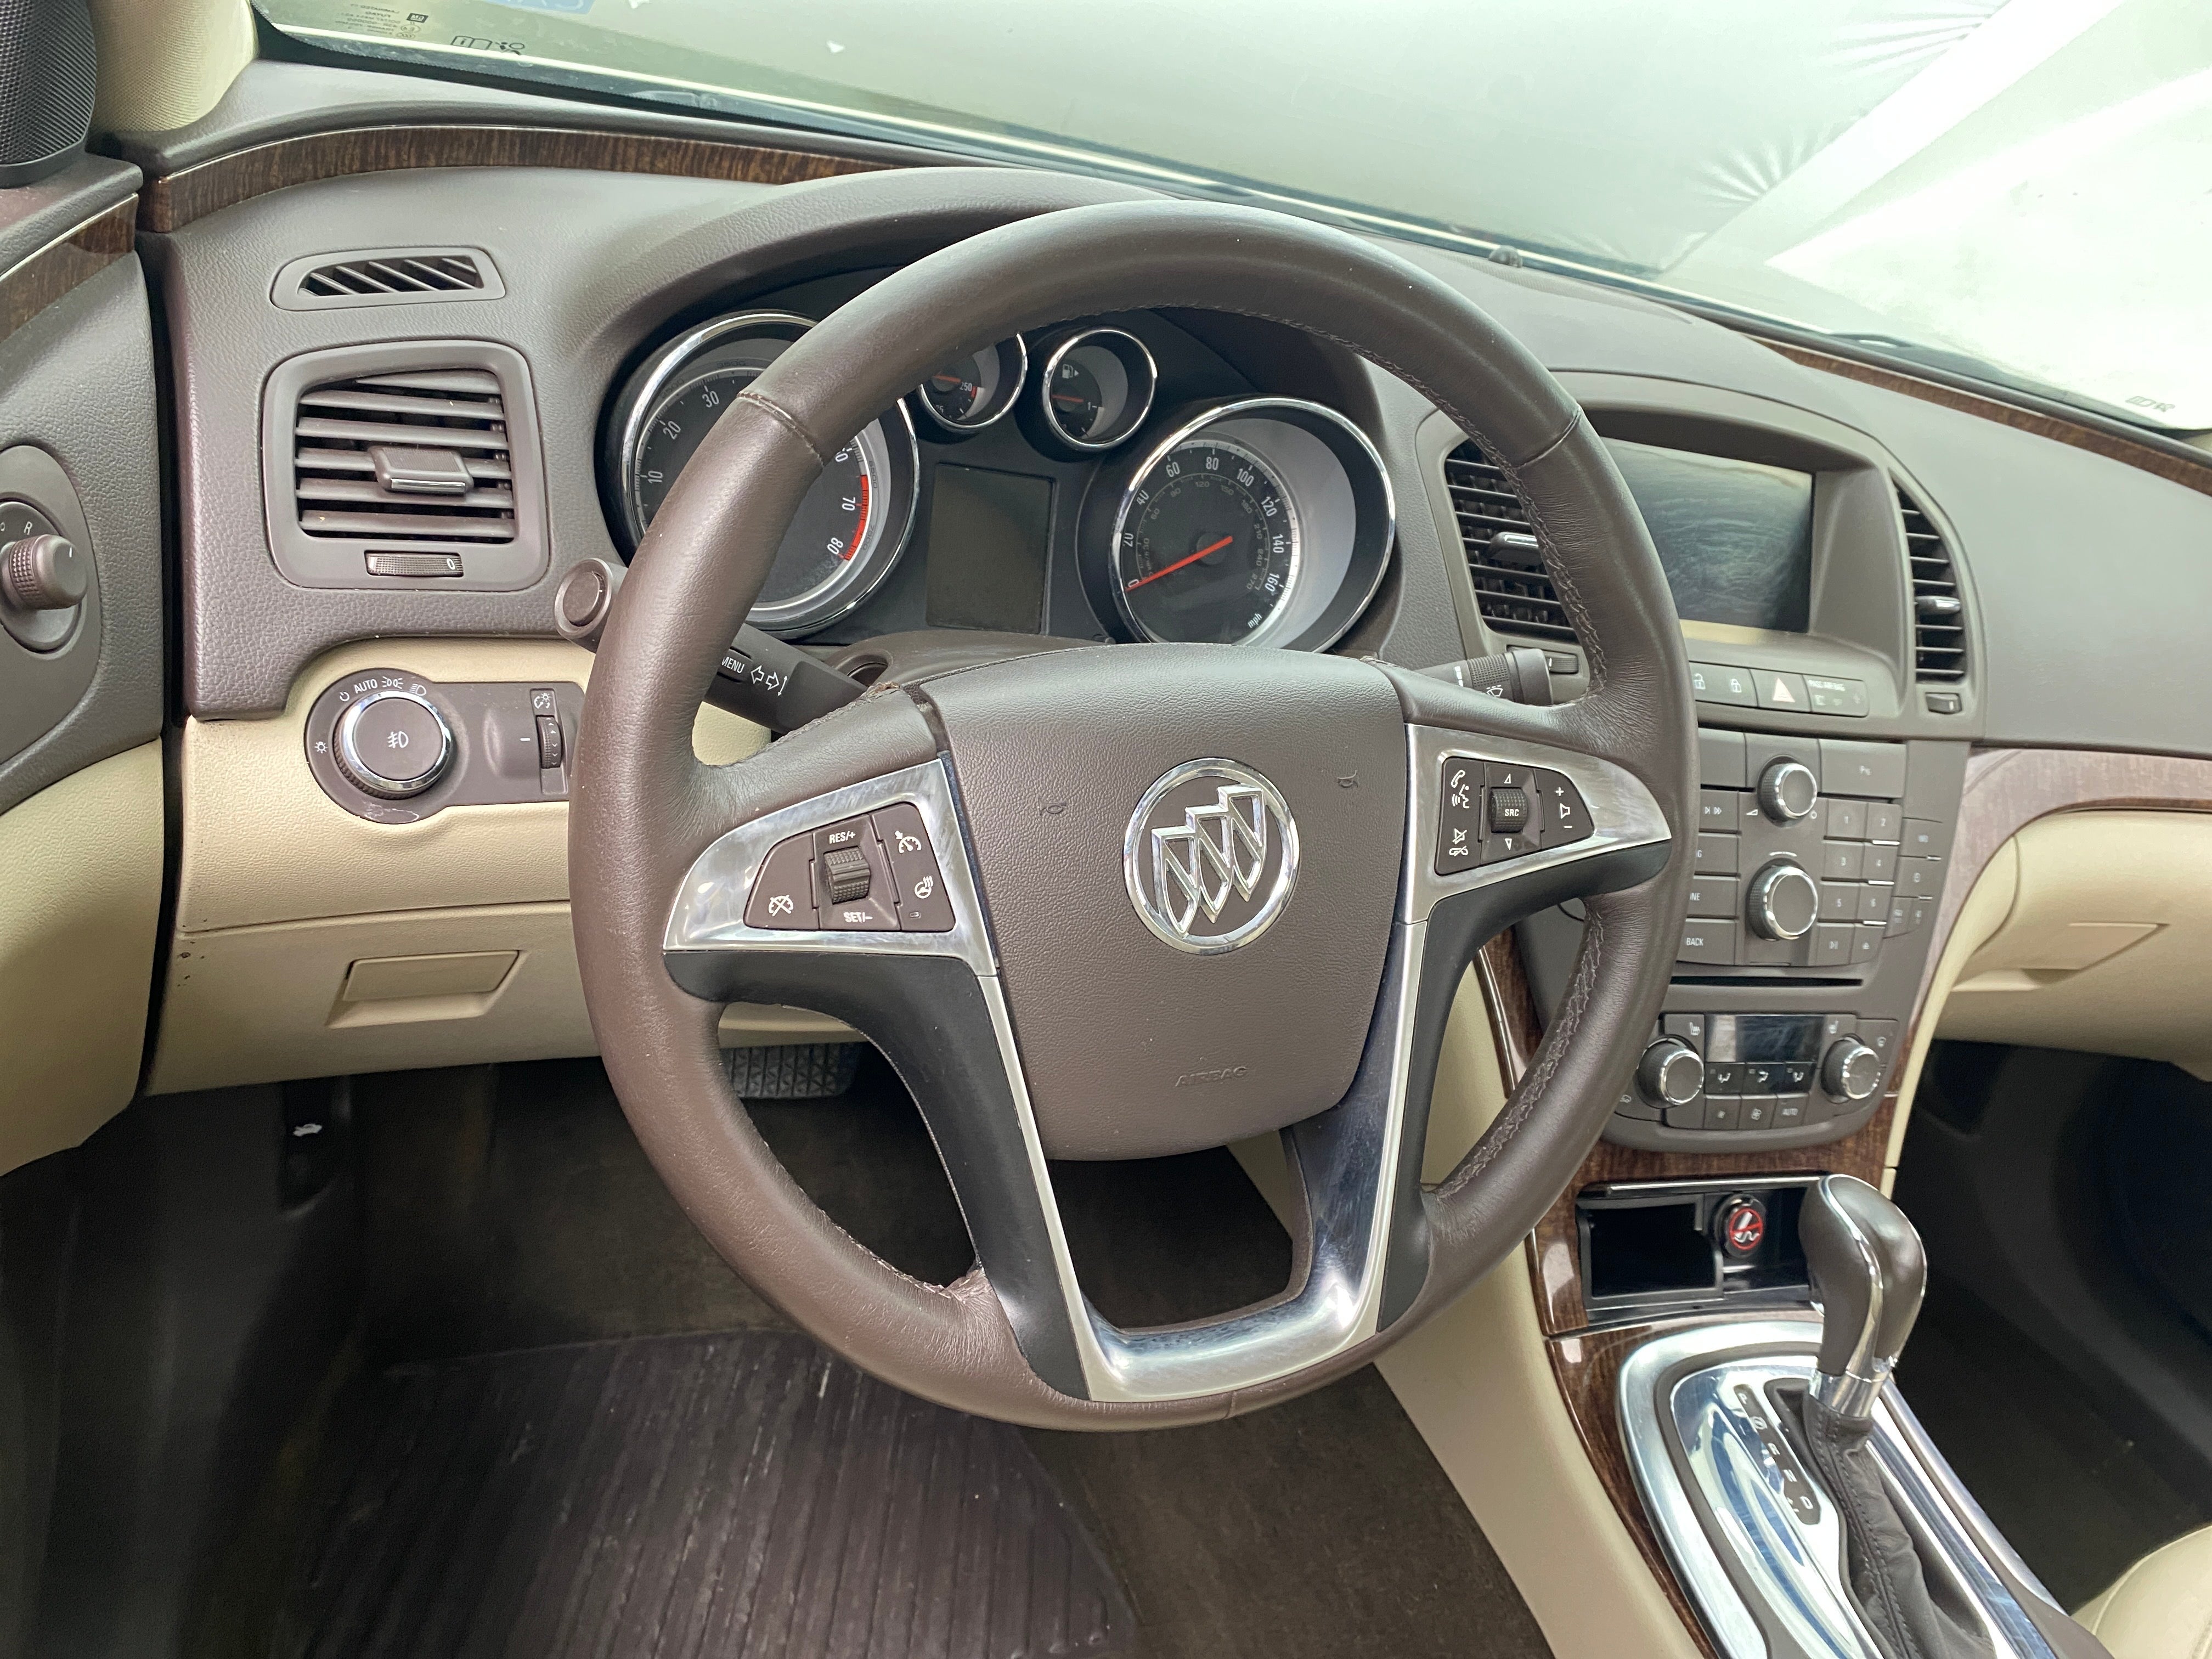 2014 Buick Regal Prices, Reviews, and Photos - MotorTrend